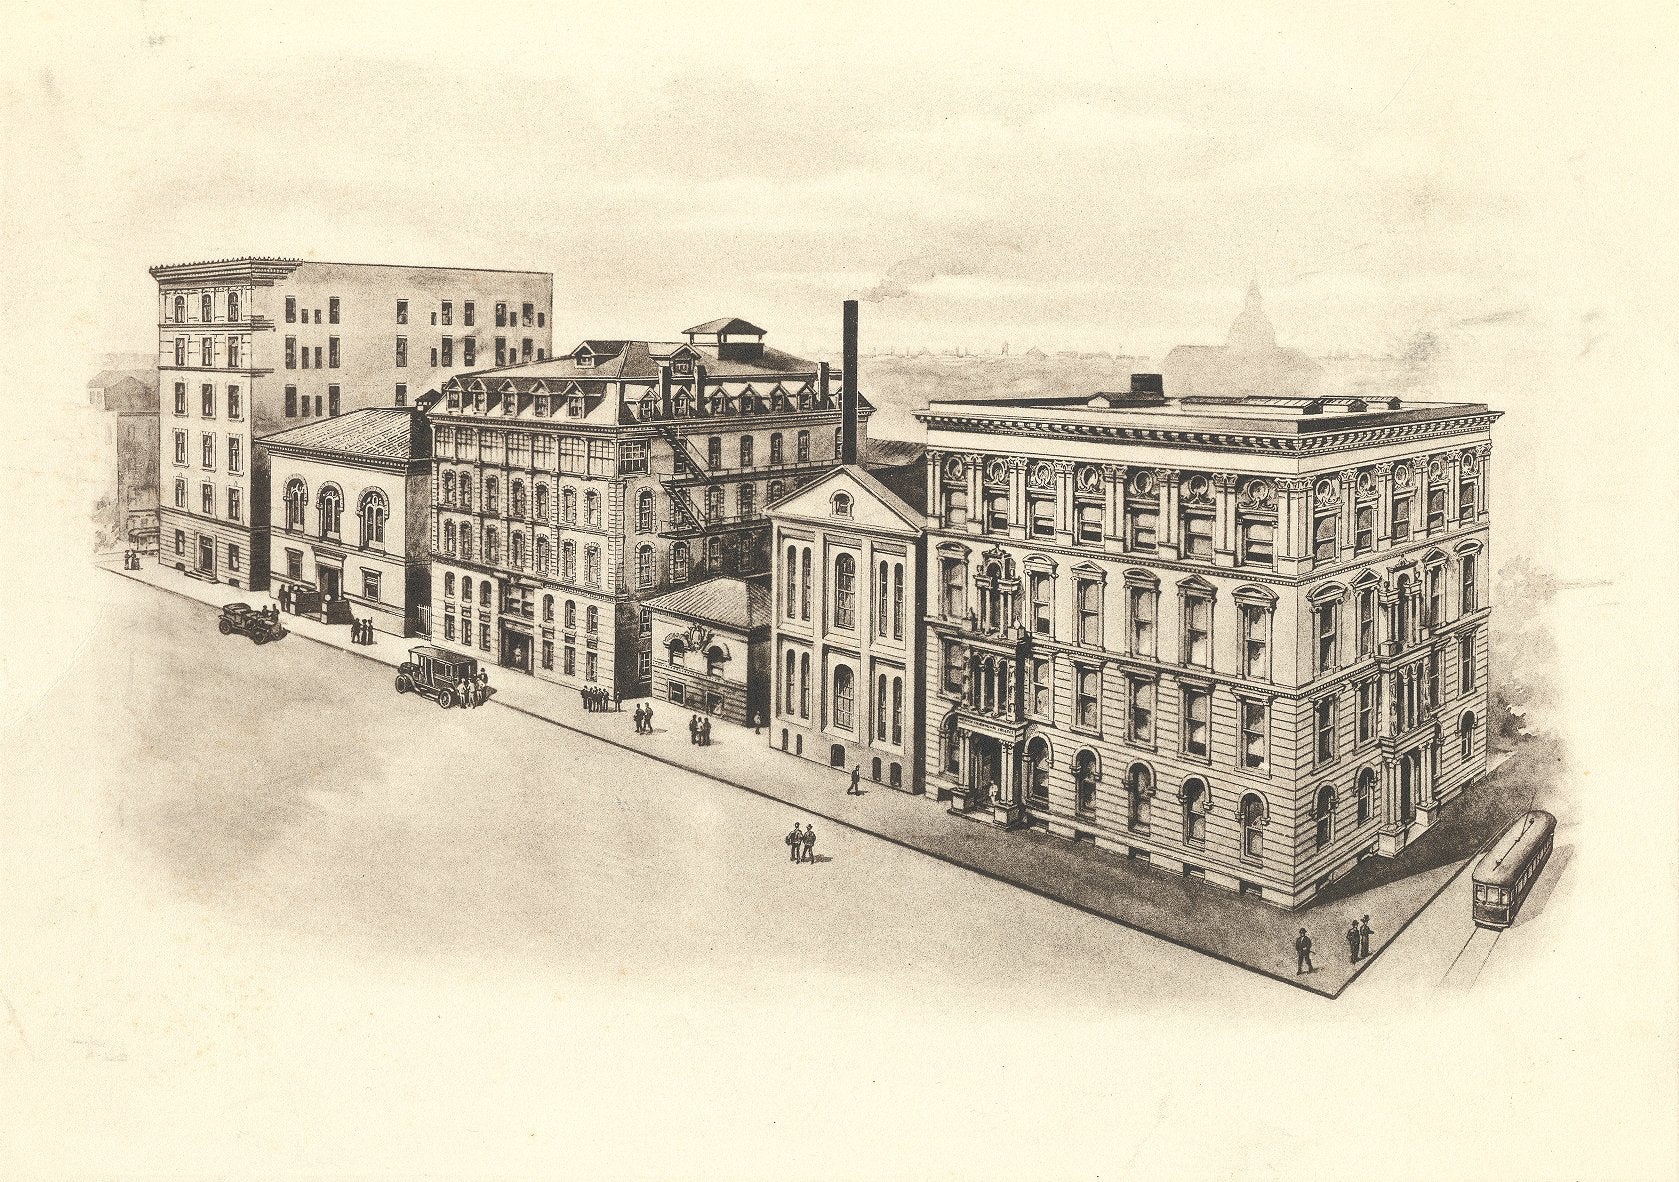 Medico-Chirurgical College and Hospital, drawing, c. 1915